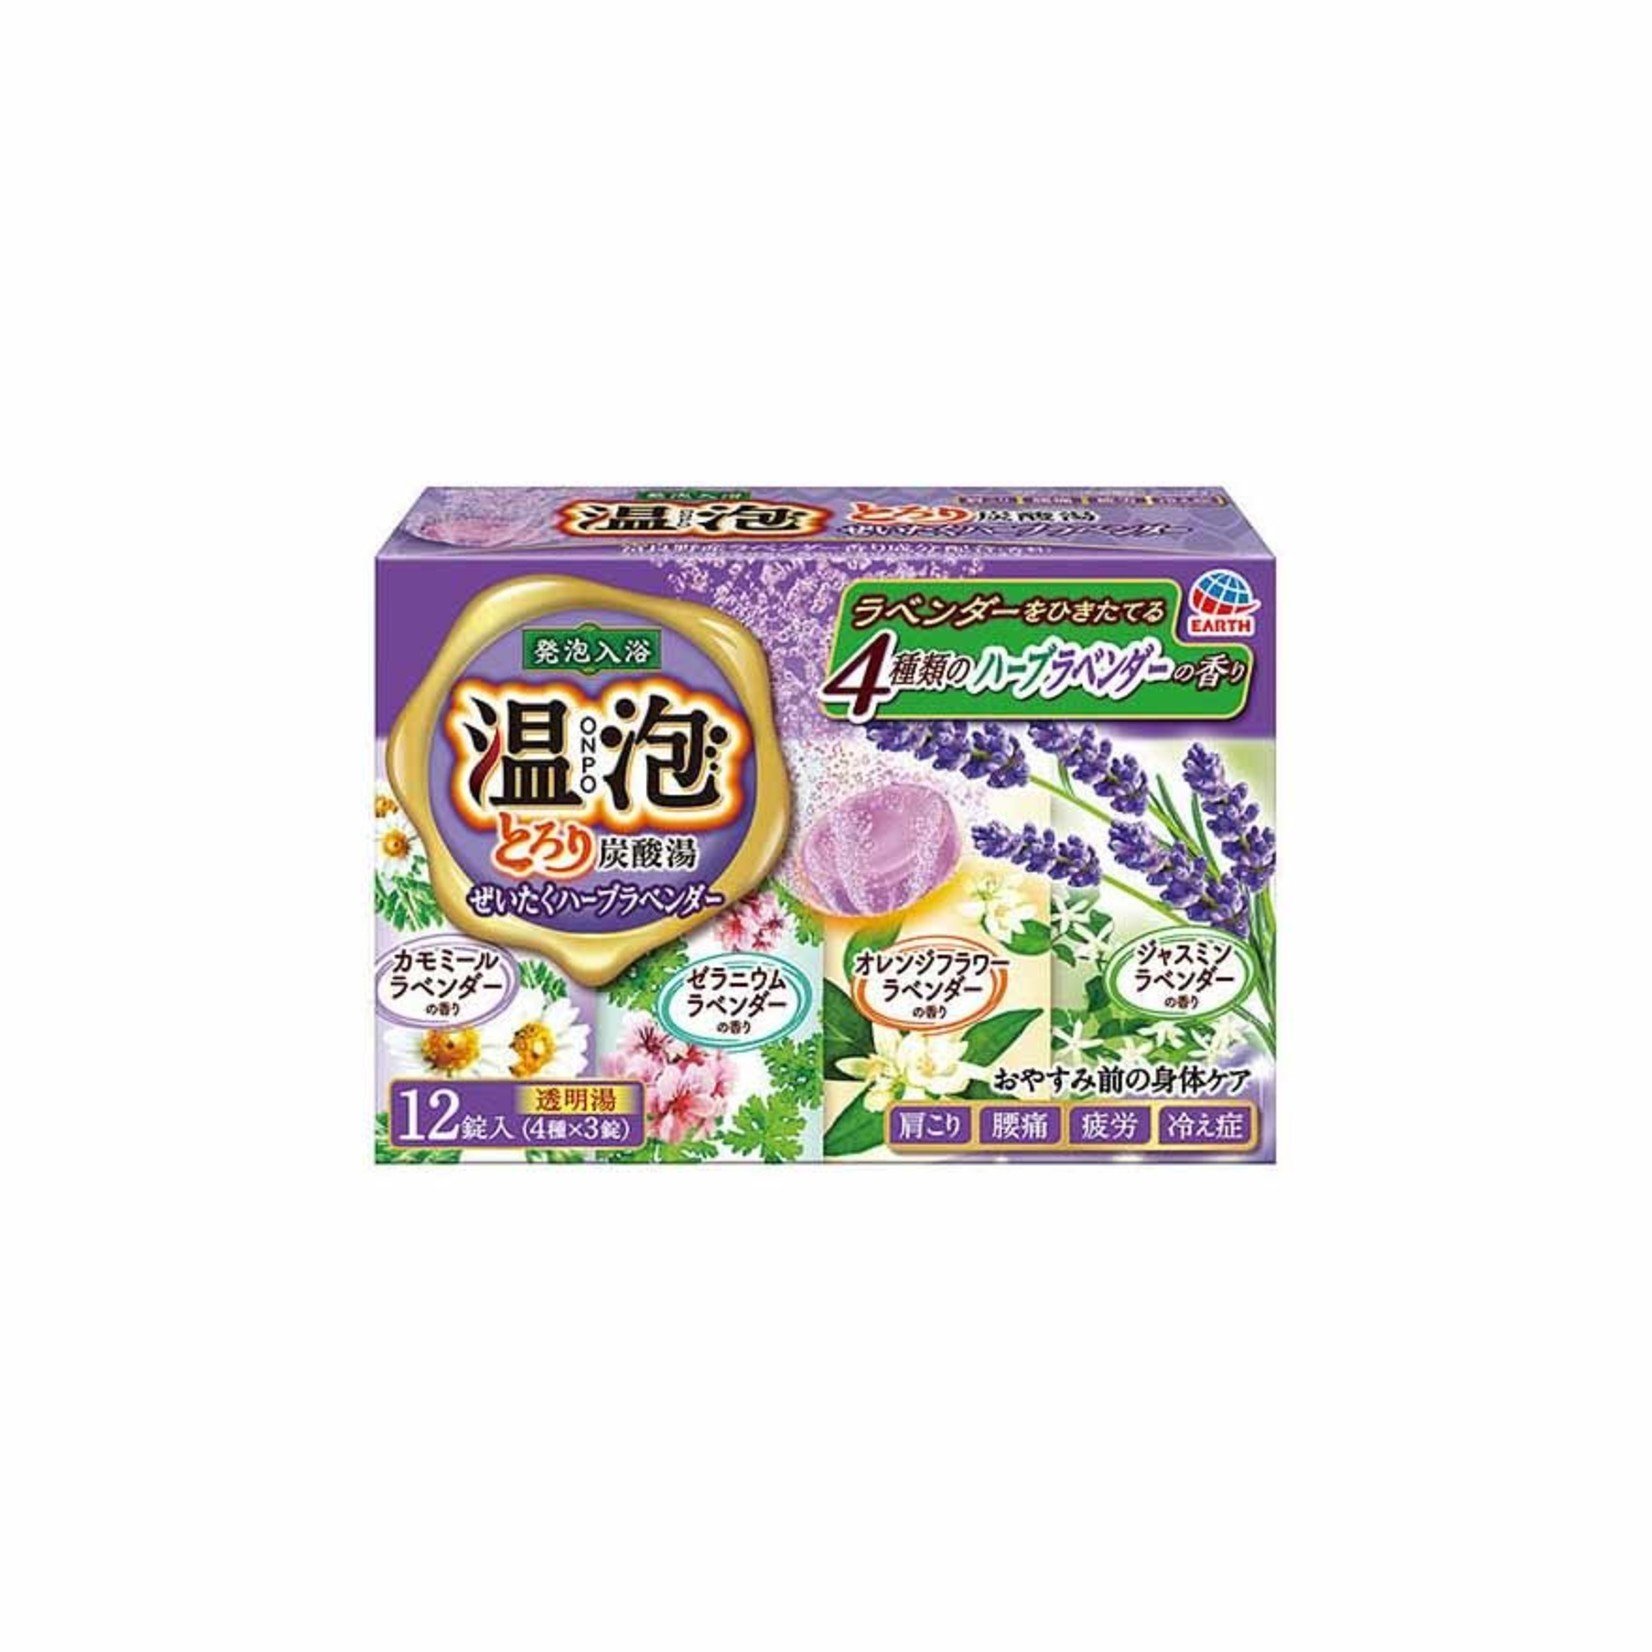 Earth Carbonated Bath 12 Tablets